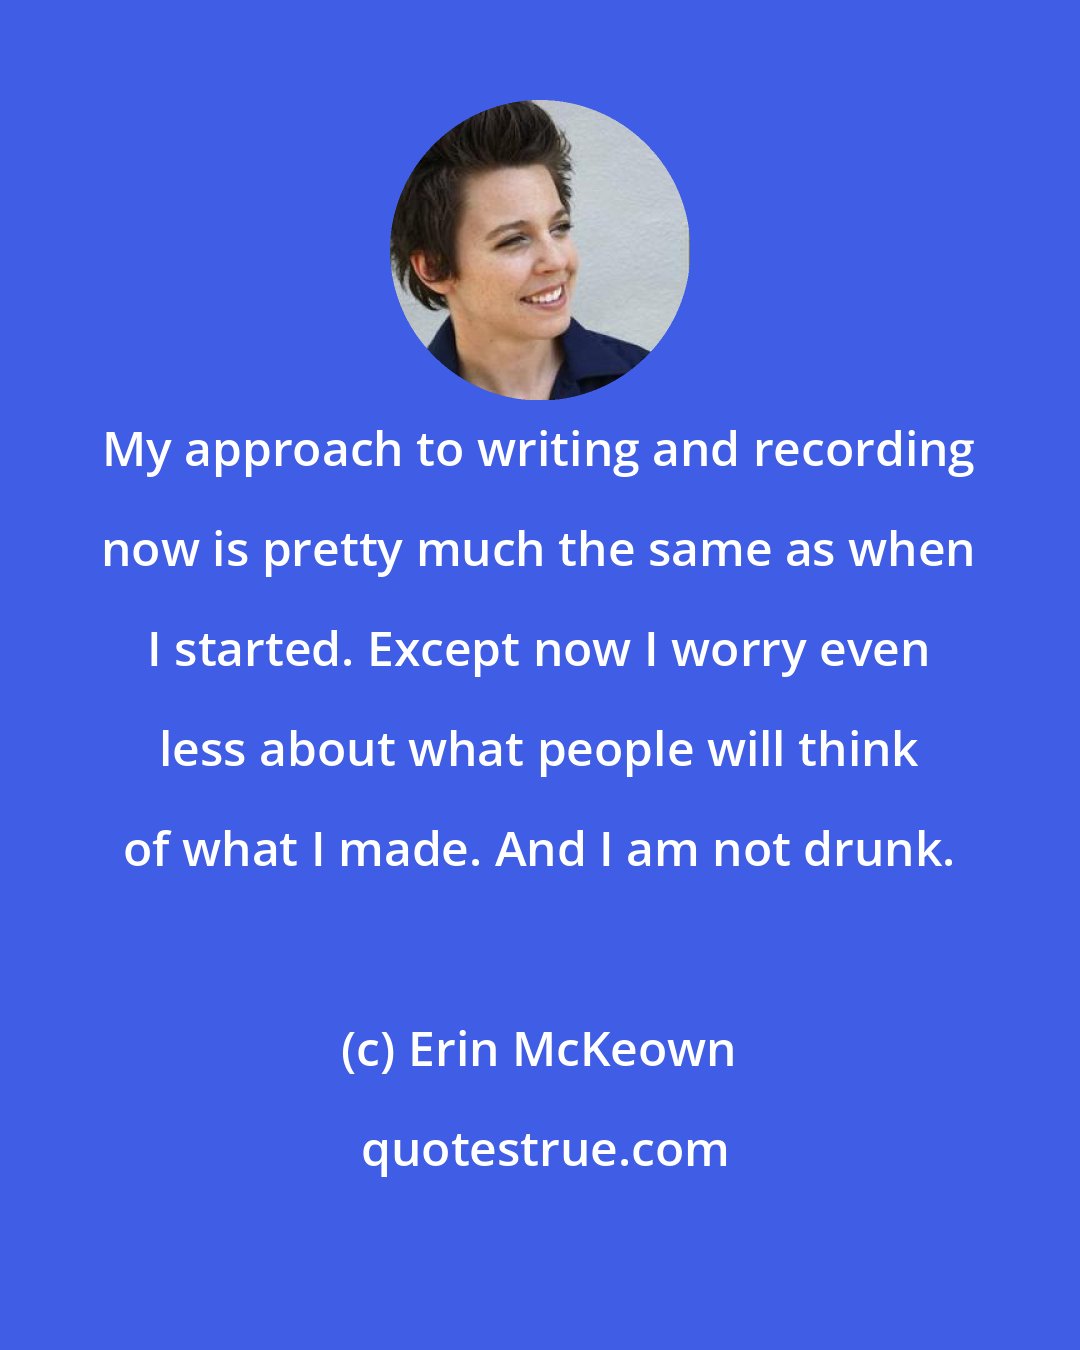 Erin McKeown: My approach to writing and recording now is pretty much the same as when I started. Except now I worry even less about what people will think of what I made. And I am not drunk.